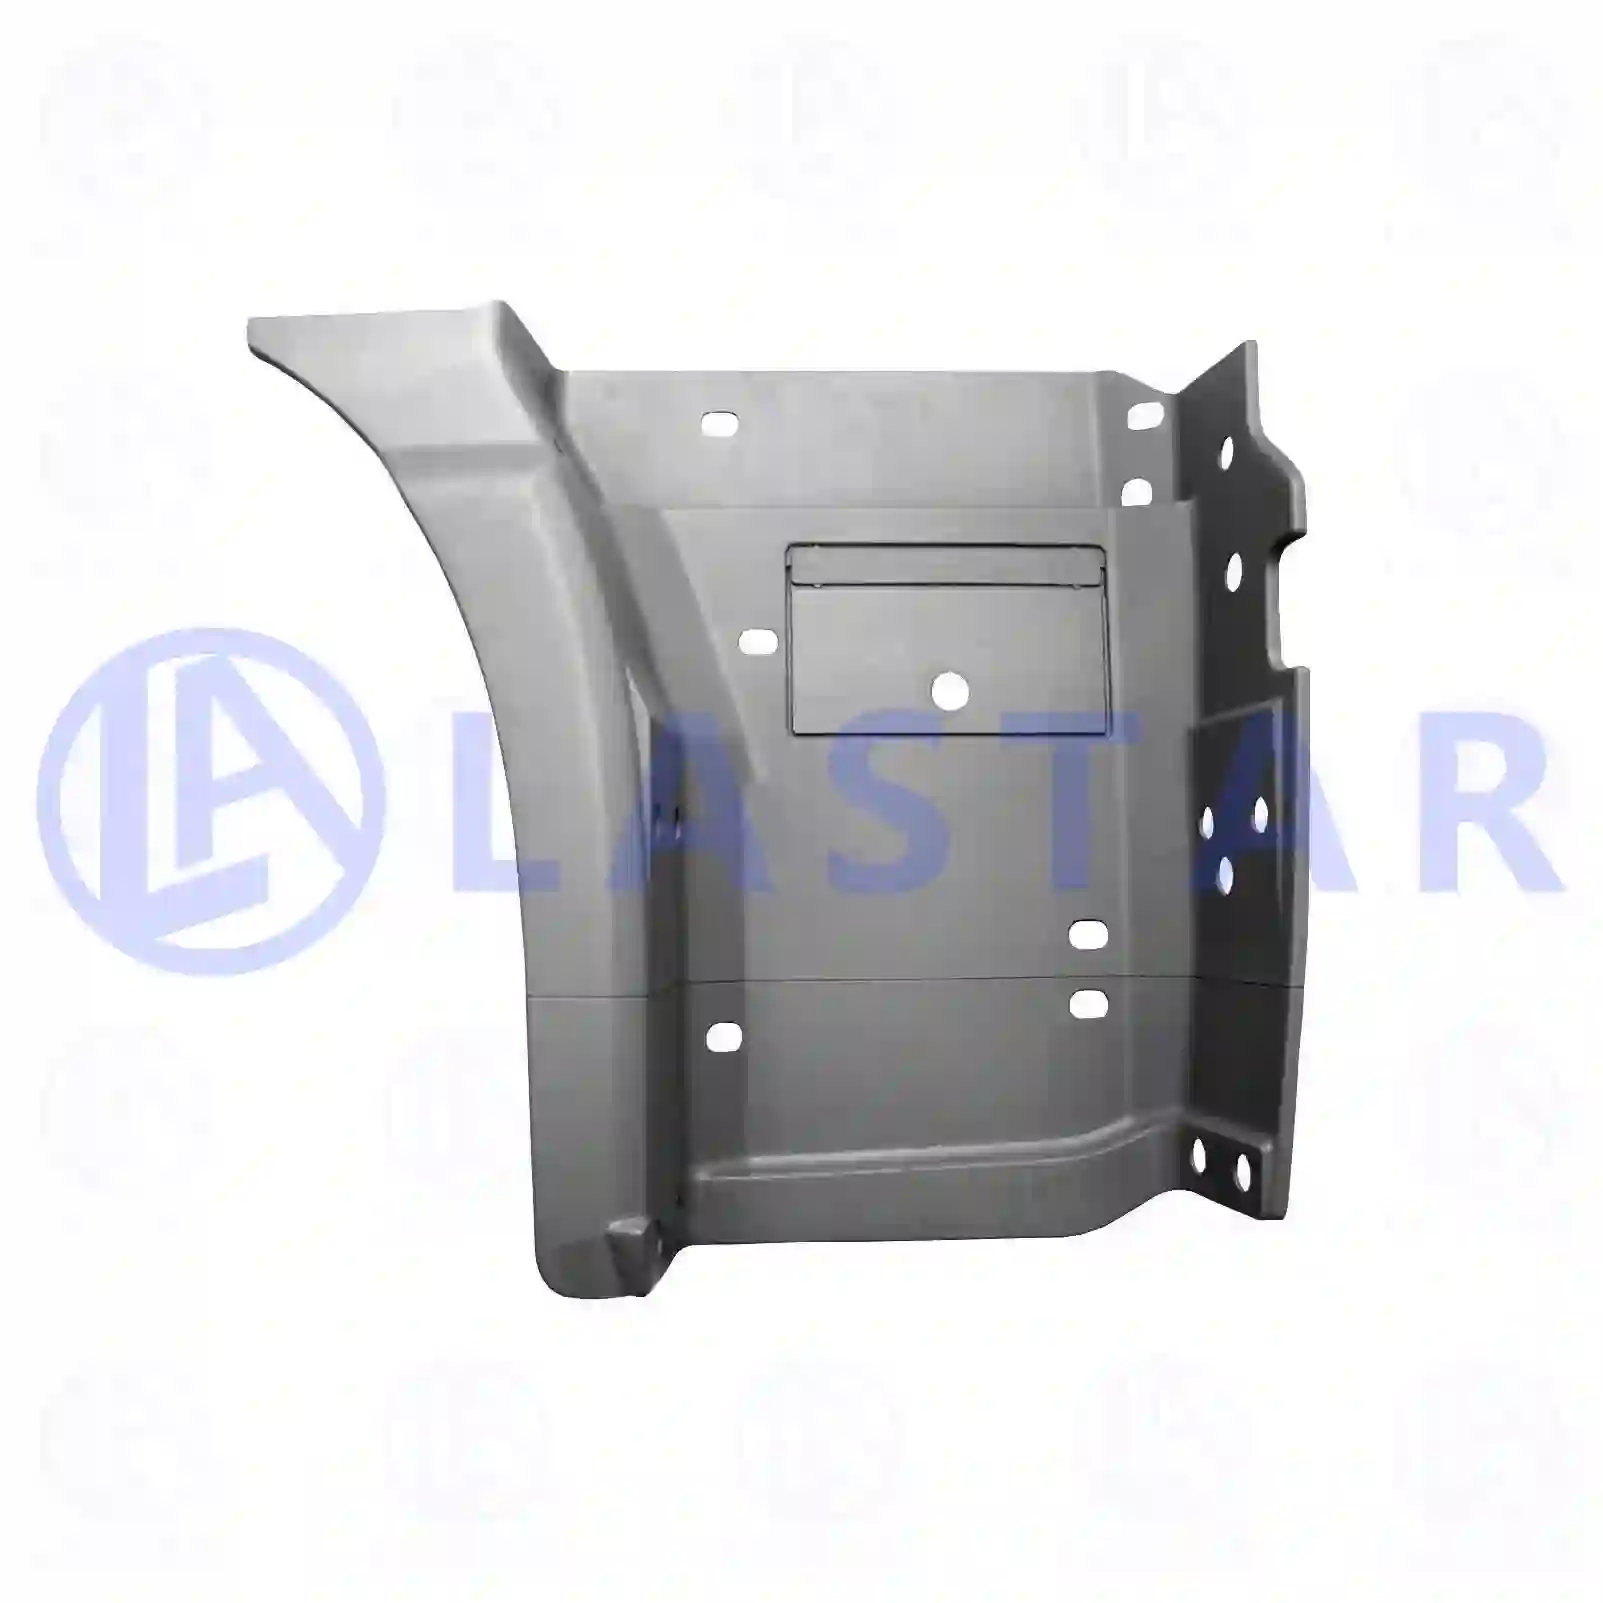 Body Step well case, right, la no: 77718773 ,  oem no:4006600301, 9416600301, 94166003017C72 Lastar Spare Part | Truck Spare Parts, Auotomotive Spare Parts